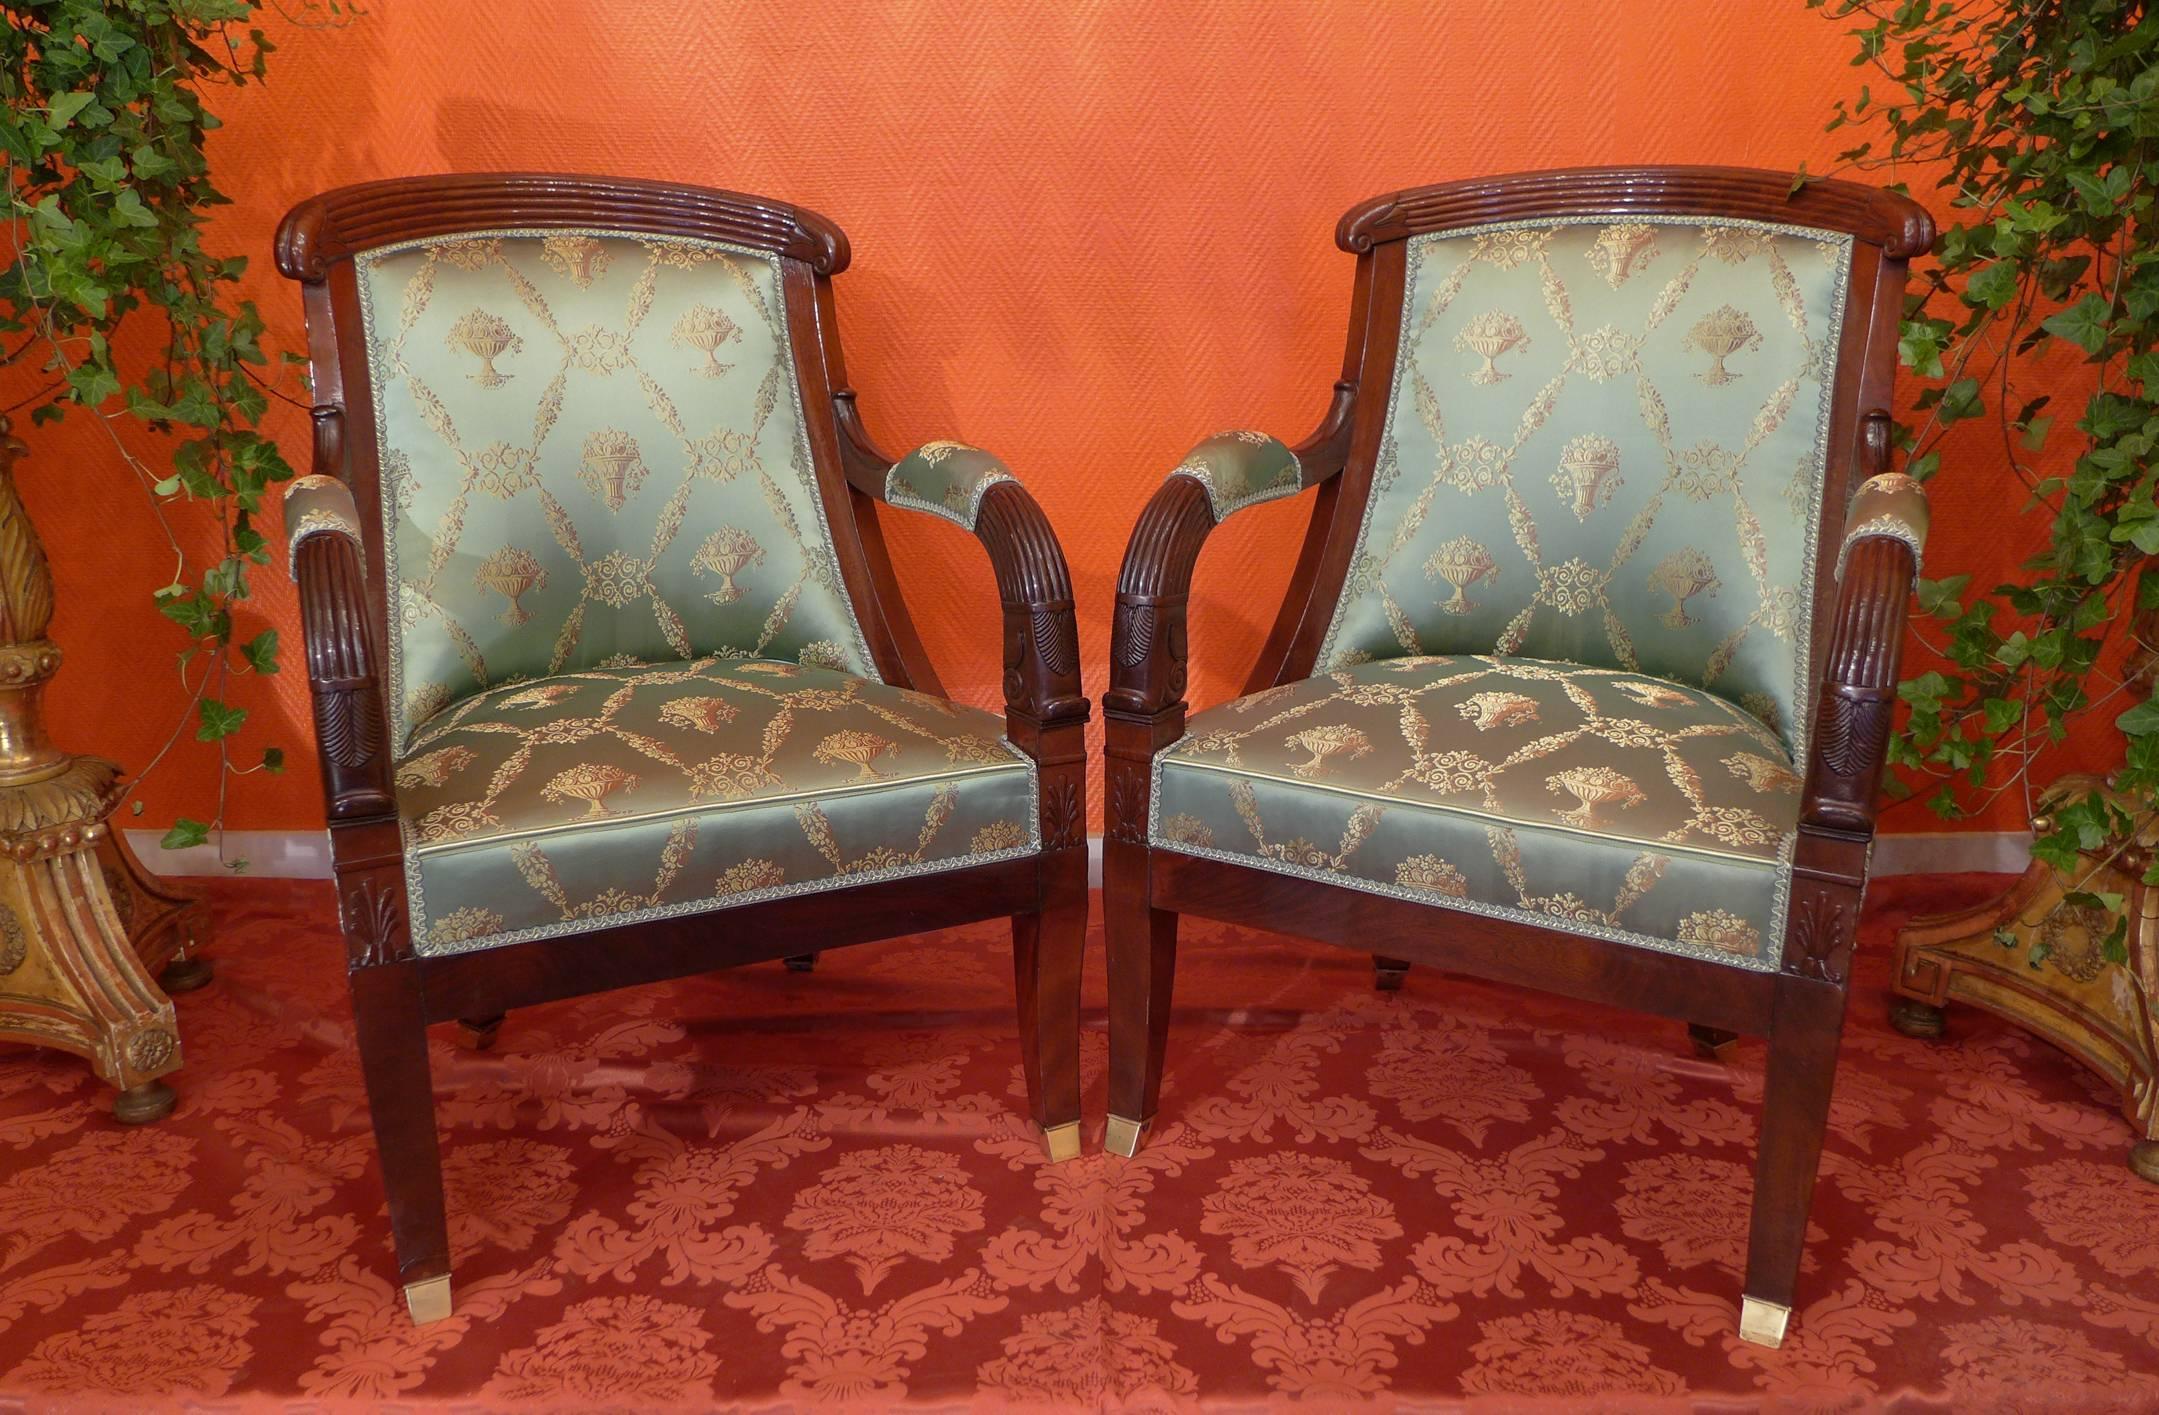 French Large Pair of Early-19th Century Empire Period Mahogany Armchairs For Sale 4